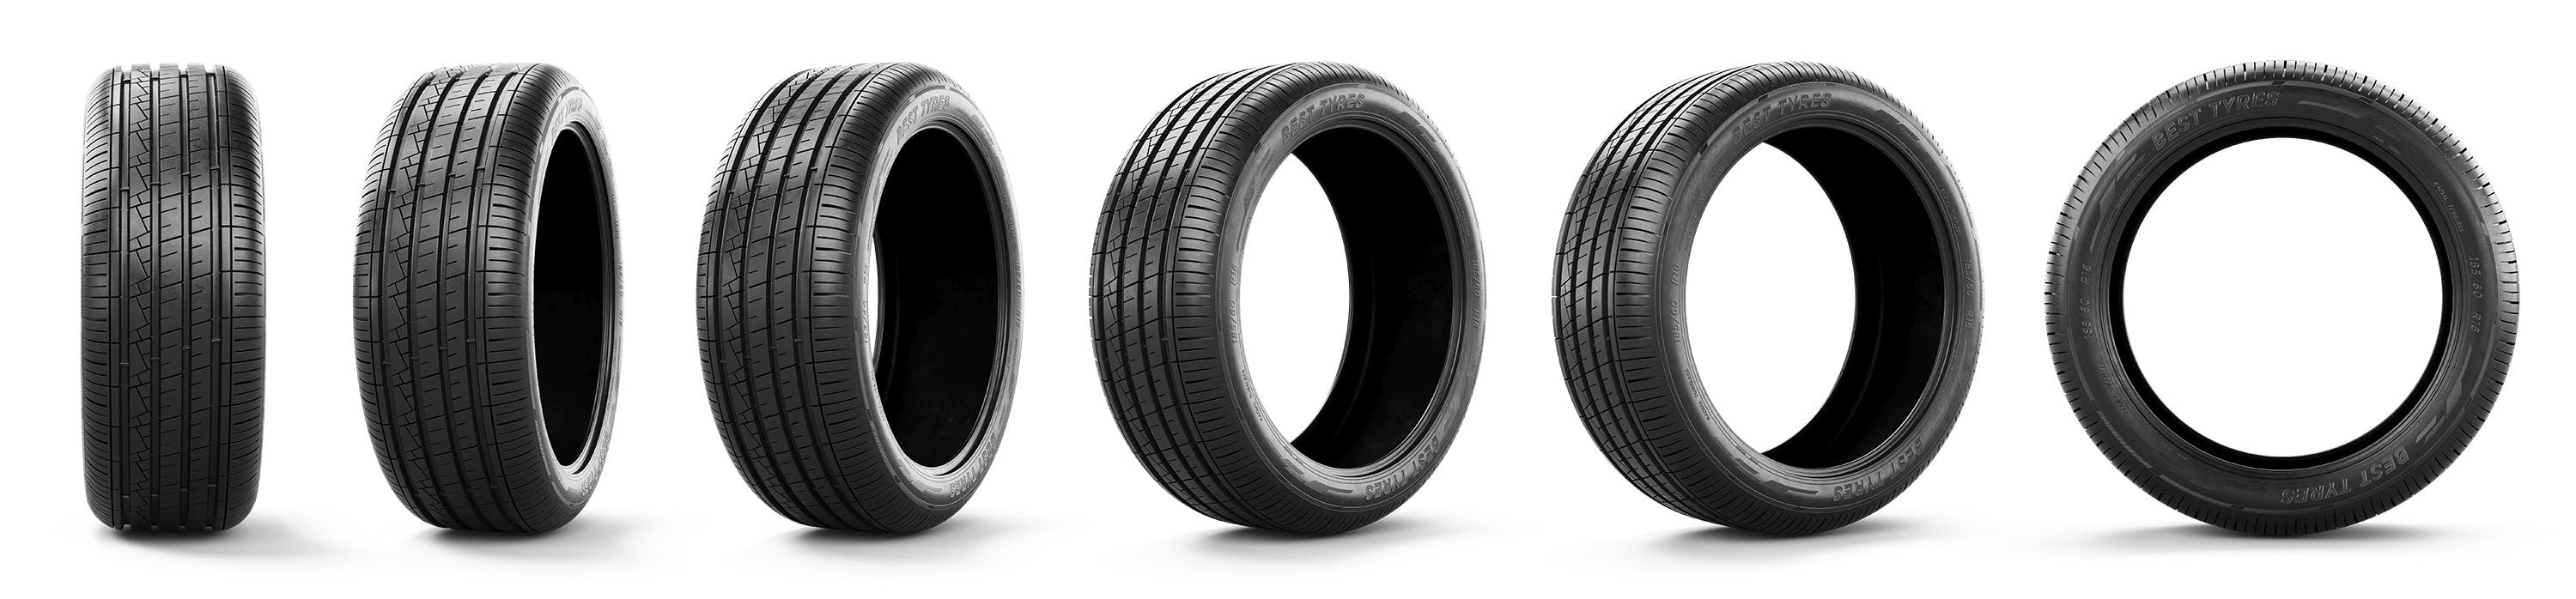 Image of Tyres in a different angle